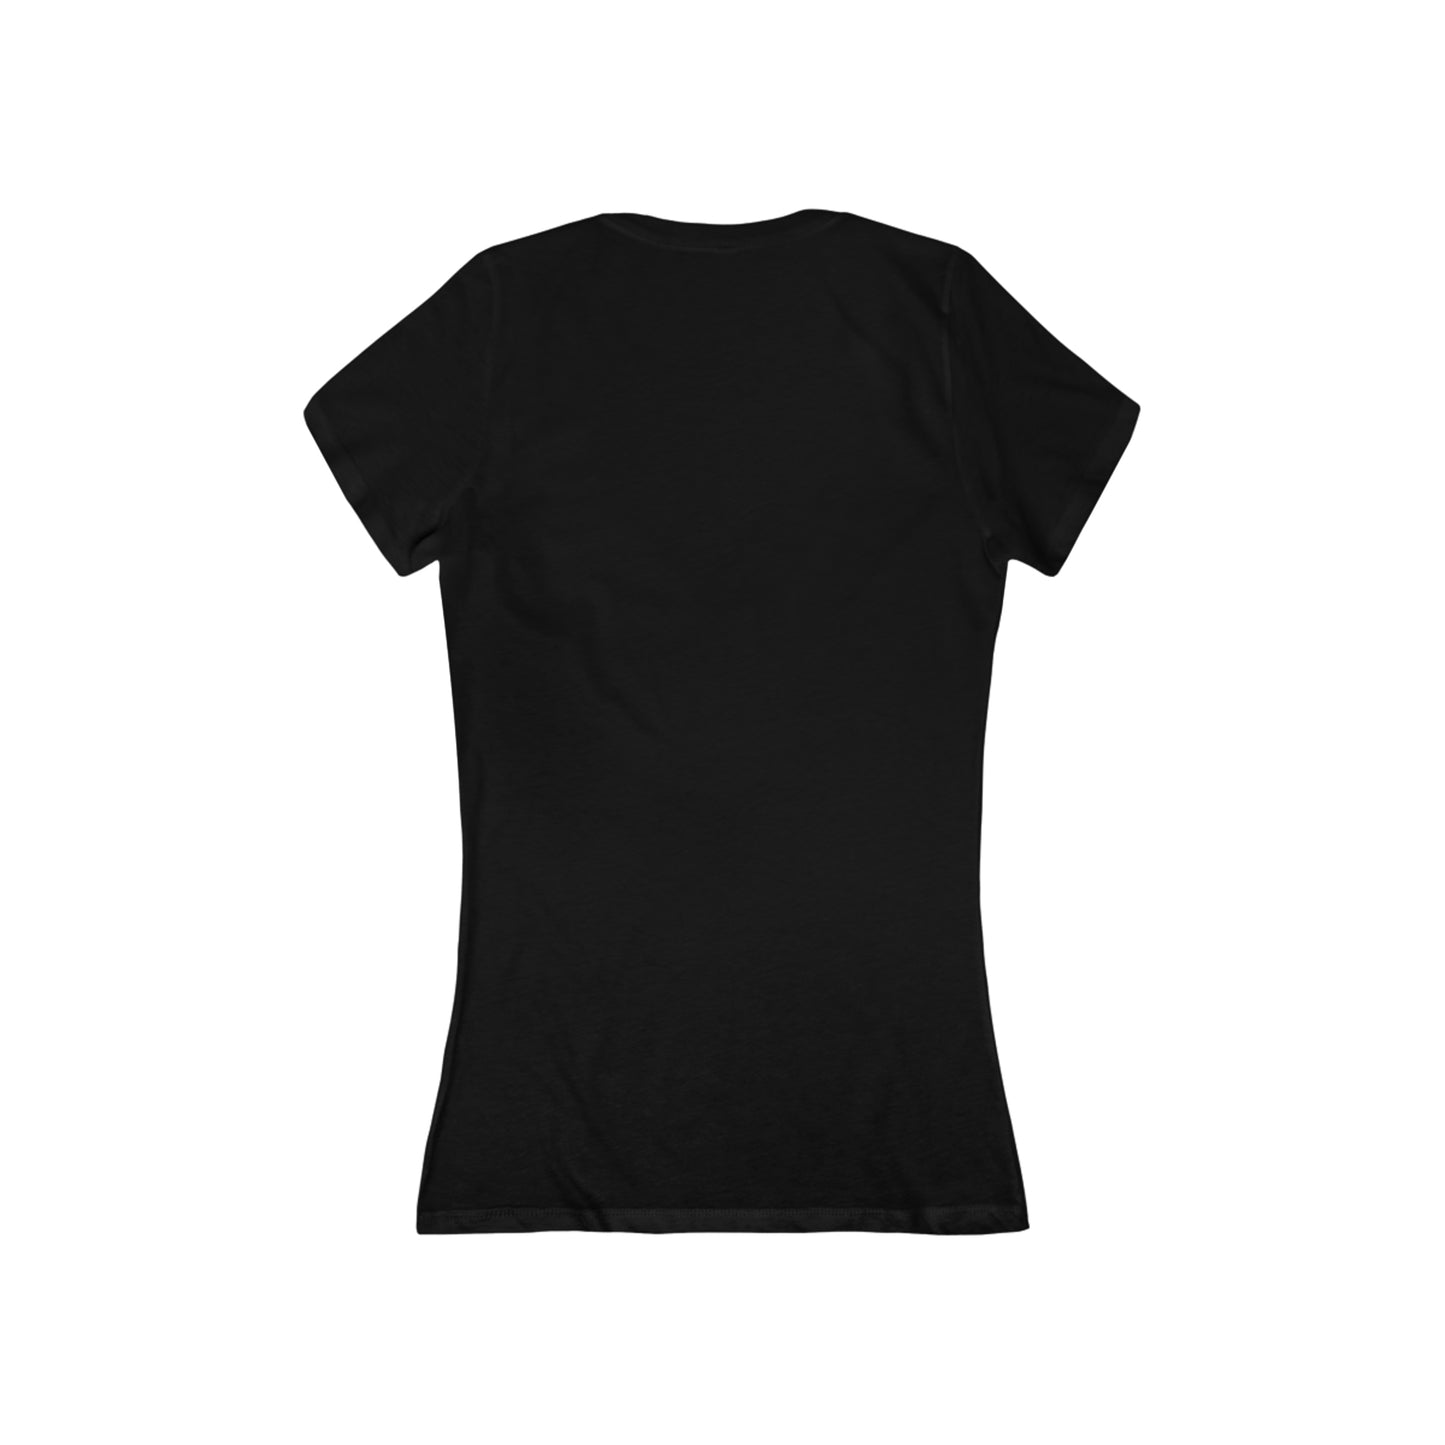 Purpose Over Paycheck | Women's V-Neck Tee